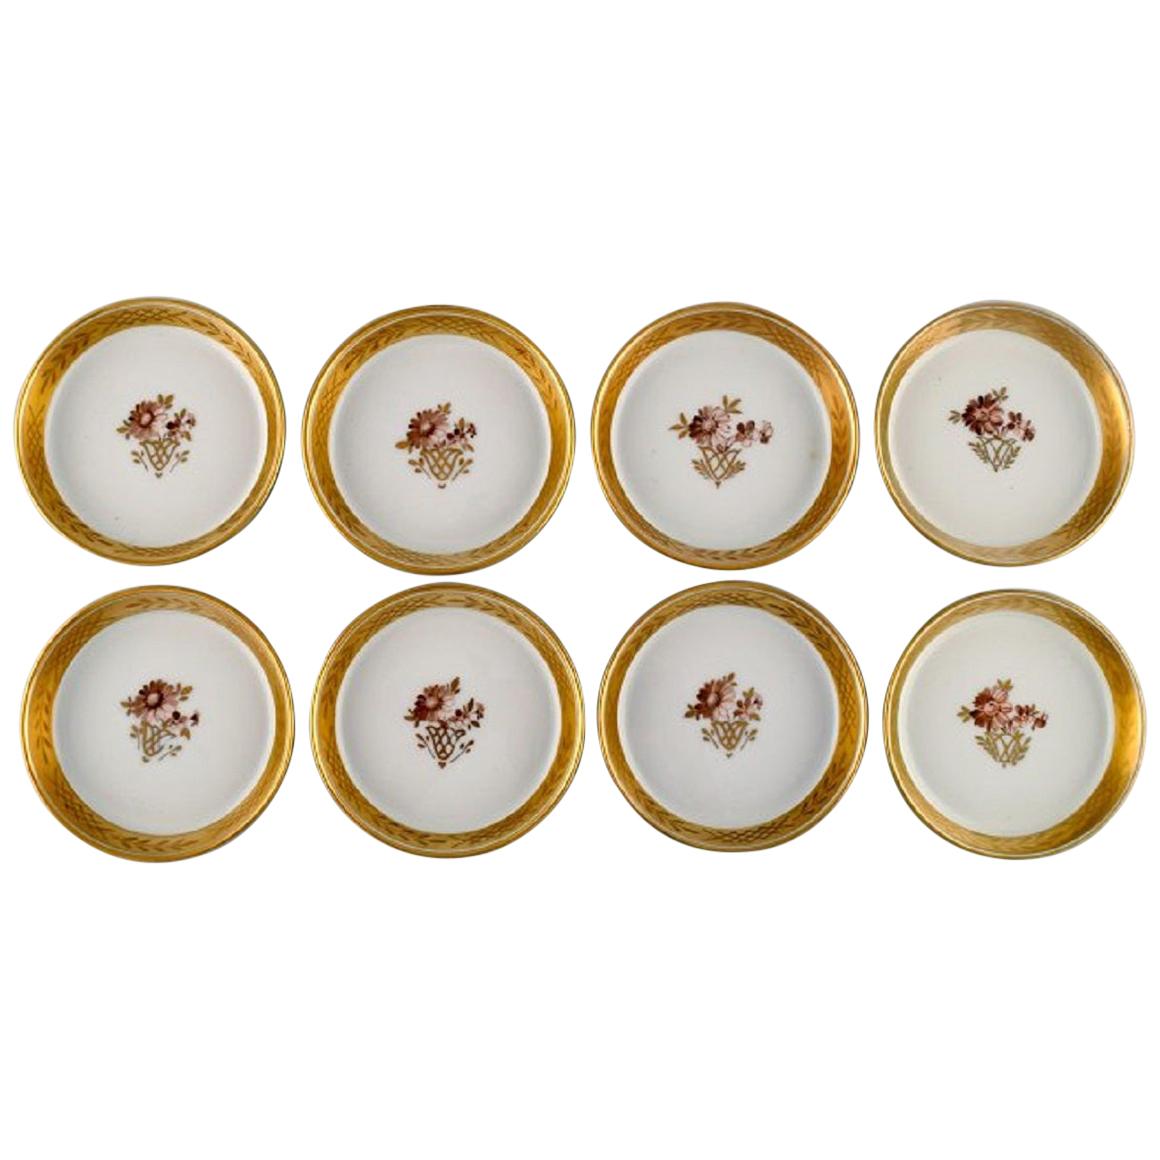 Eight Royal Copenhagen Golden Basket Coasters in Porcelain with Gold Edge For Sale